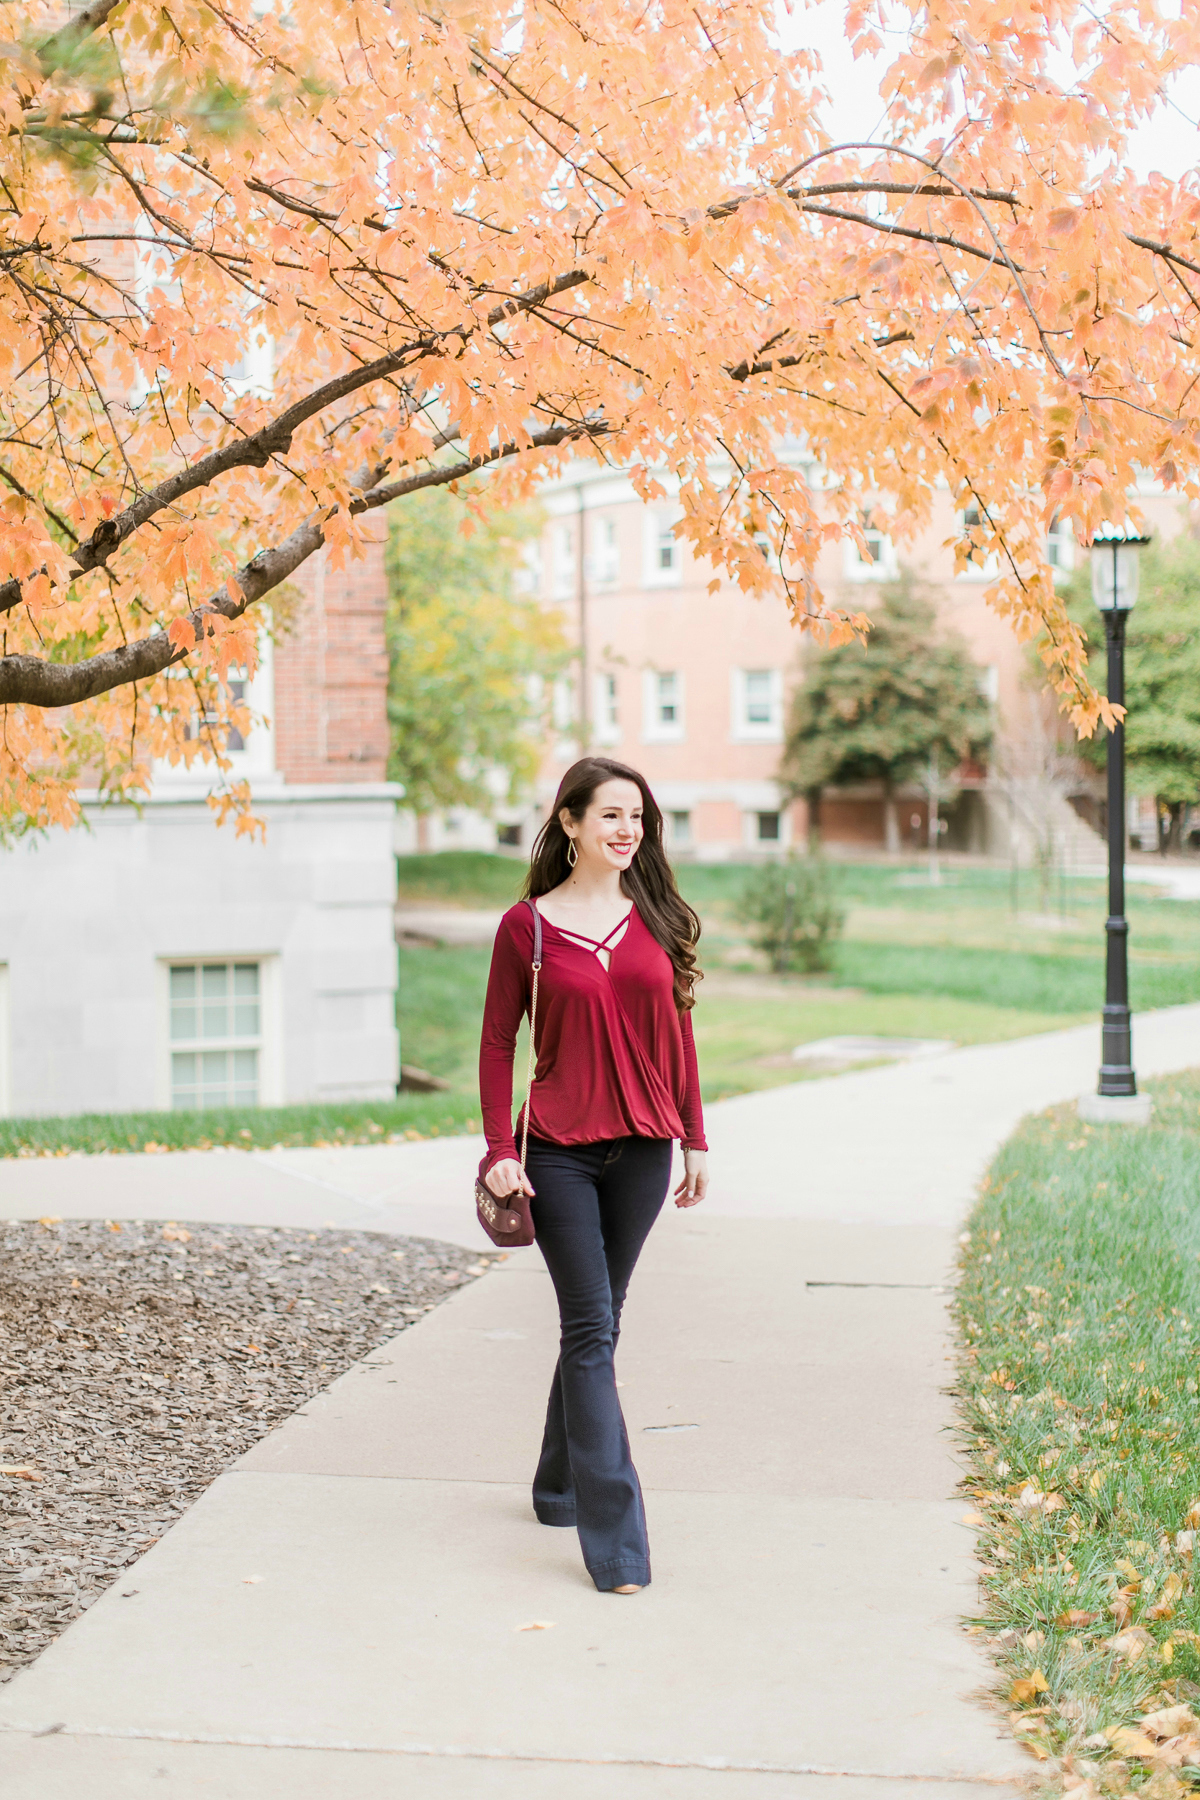 Long sleeve burgundy surplice top with dark wash flare jeans | Casual Thanksgiving outfit idea | What to Wear Out on Thanksgiving Eve by fashion blogger Stephanie Ziajka from Diary of a Debutante